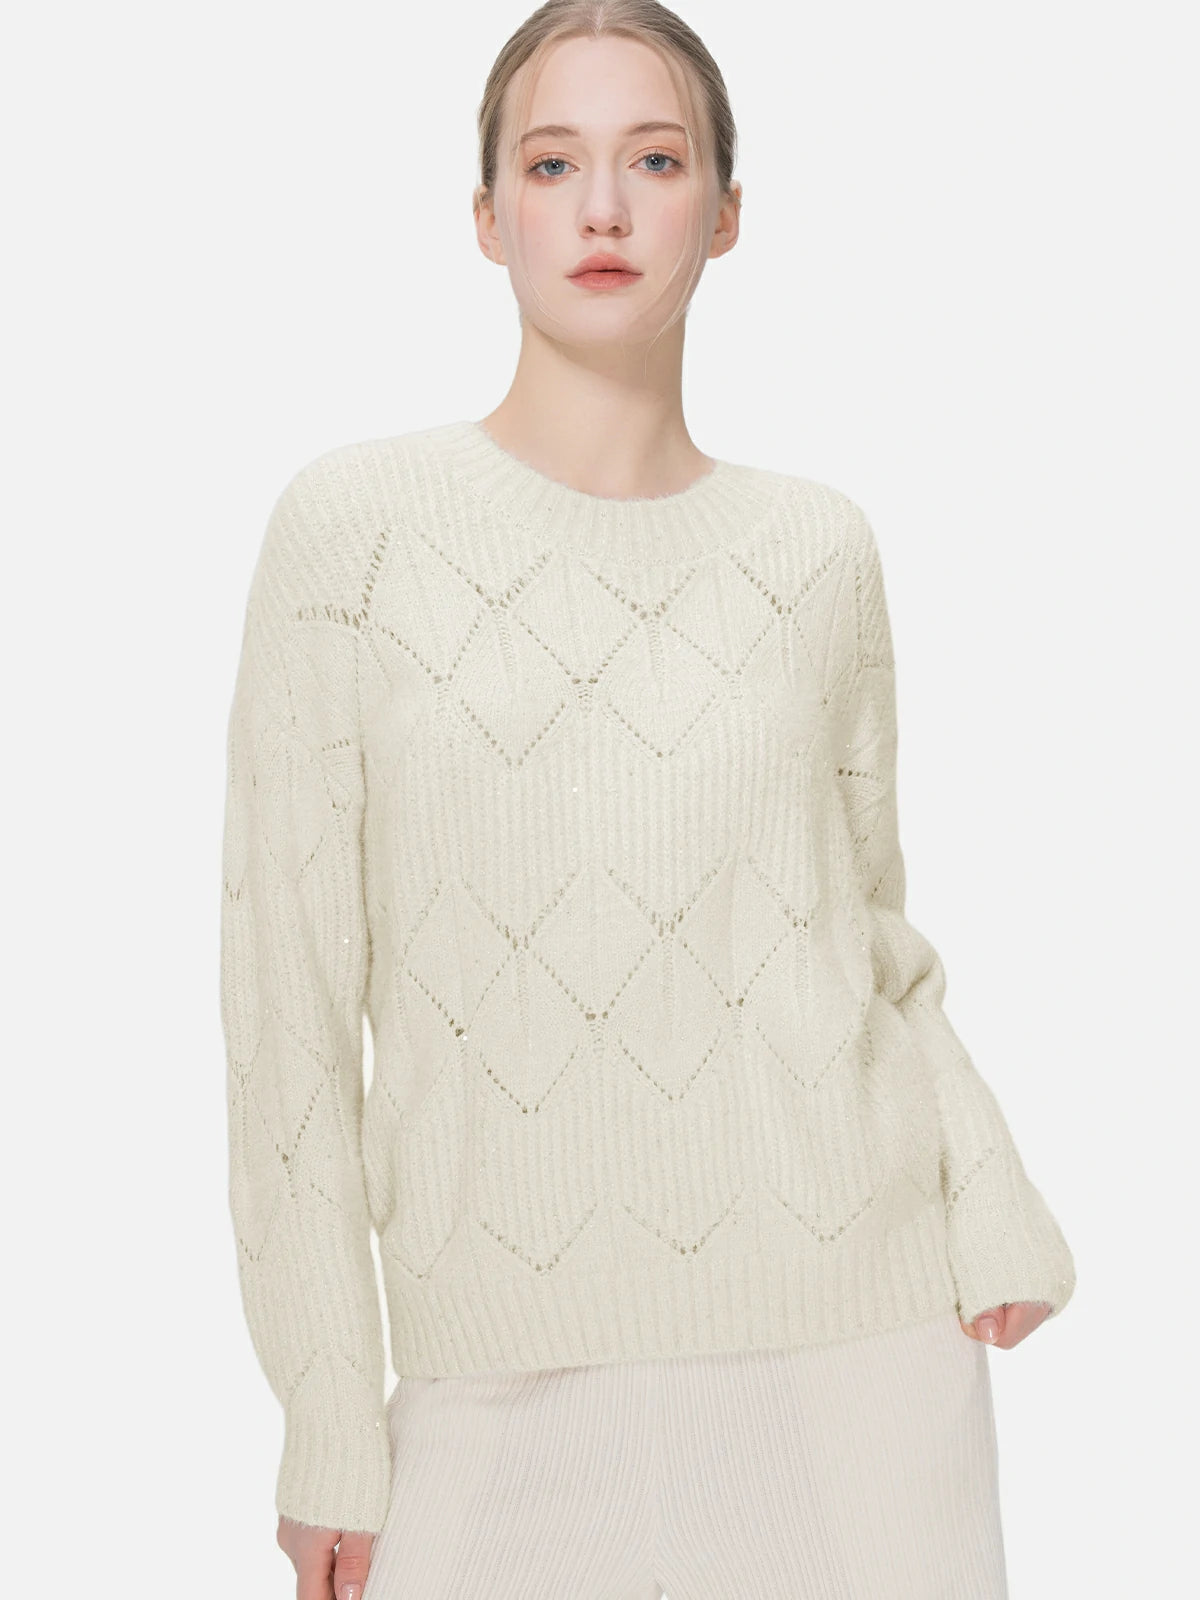 Elegant and comfortable sweater for women with a unique blend of fashion and warmth.